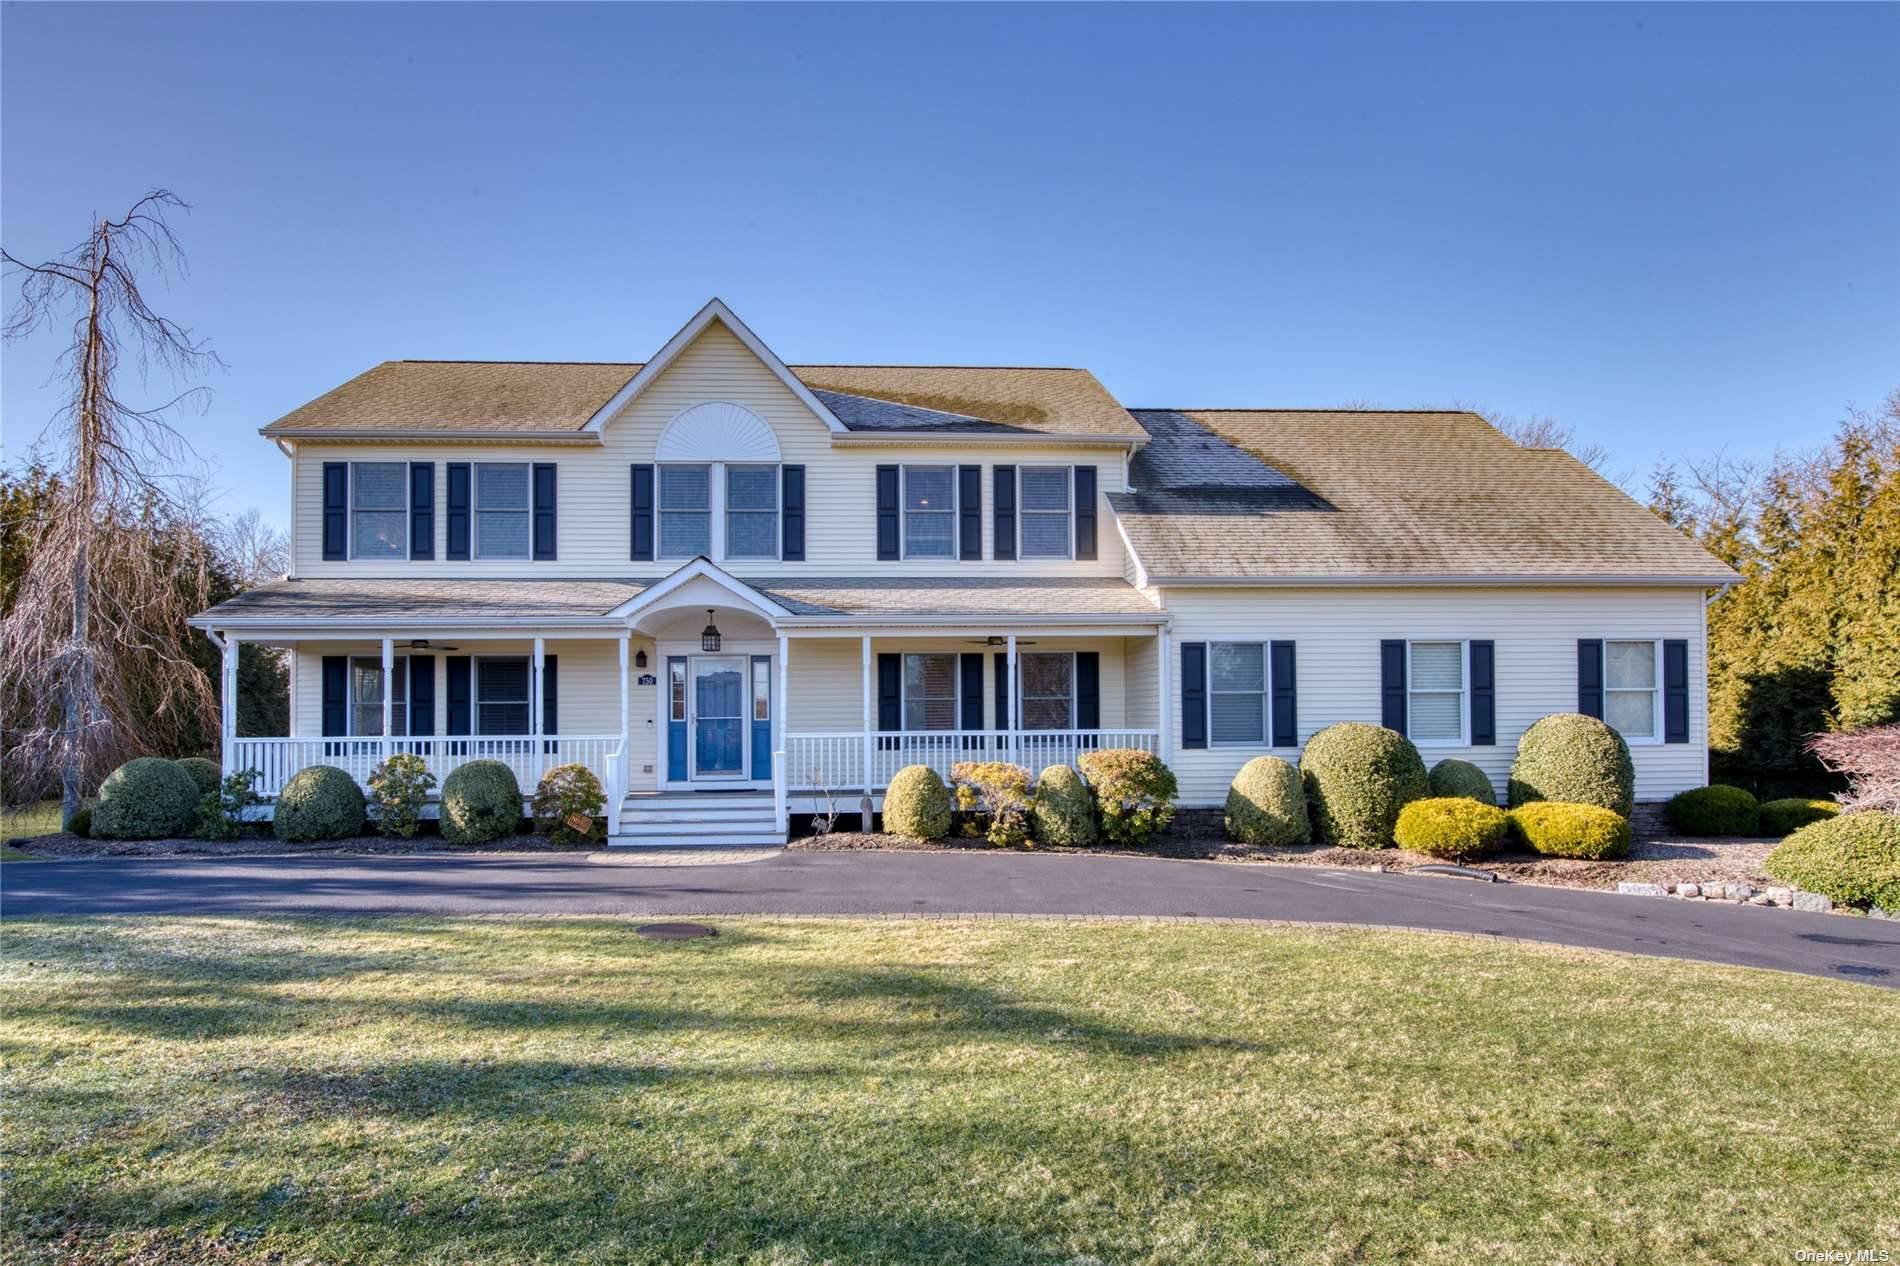 Greenport Immaculate and spacious home.